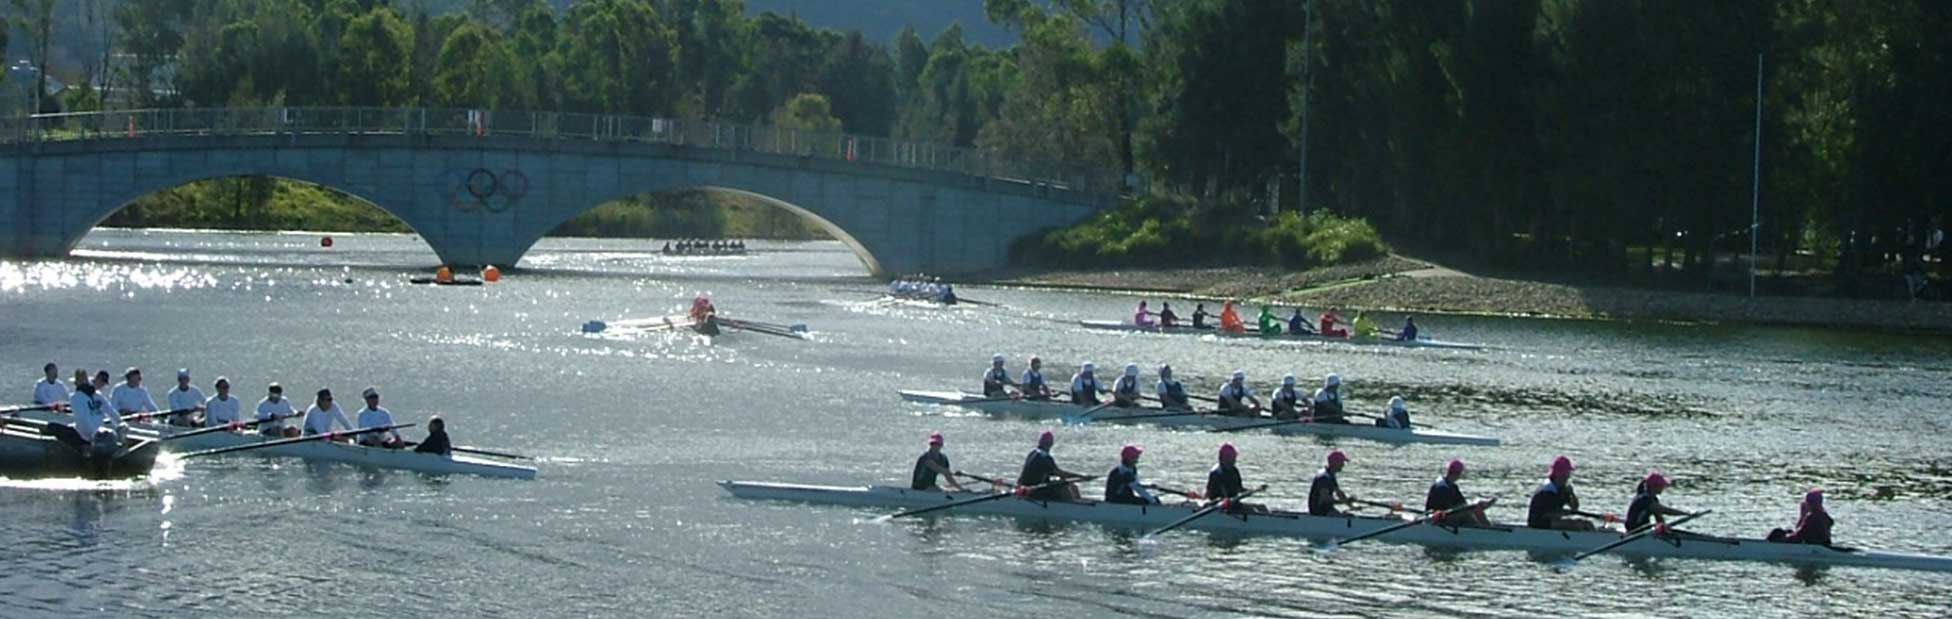 Rowers on the water at SIRC